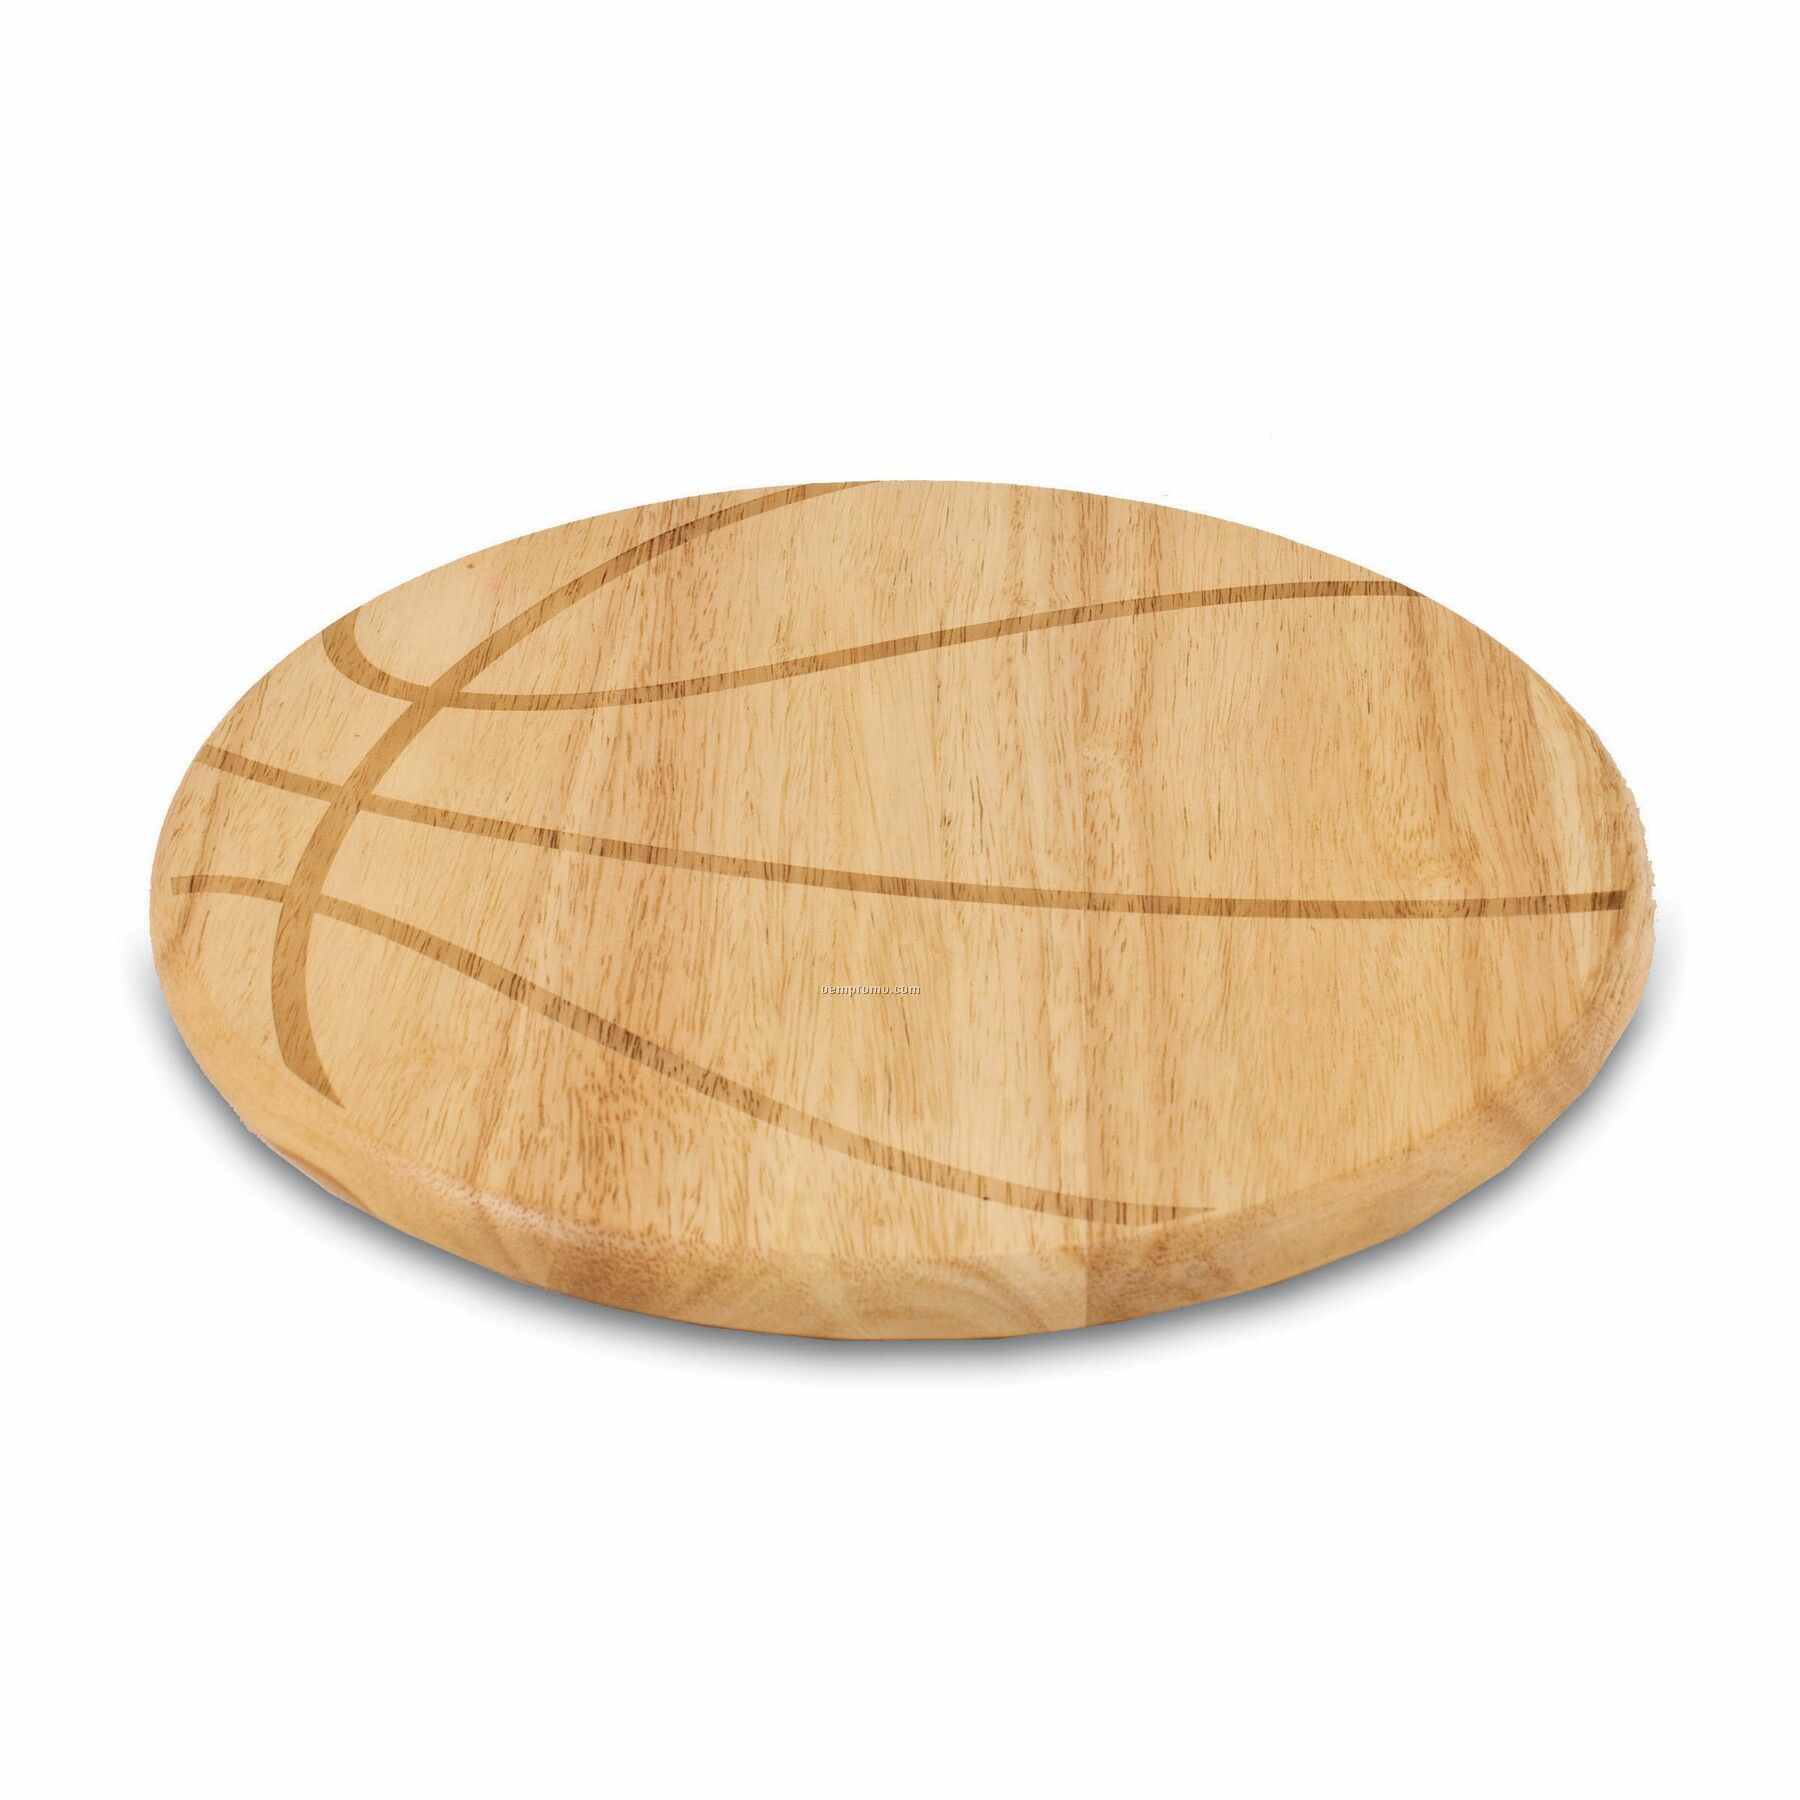 Free Throw Basketball Shaped Wood Cutting Board / Serving Tray